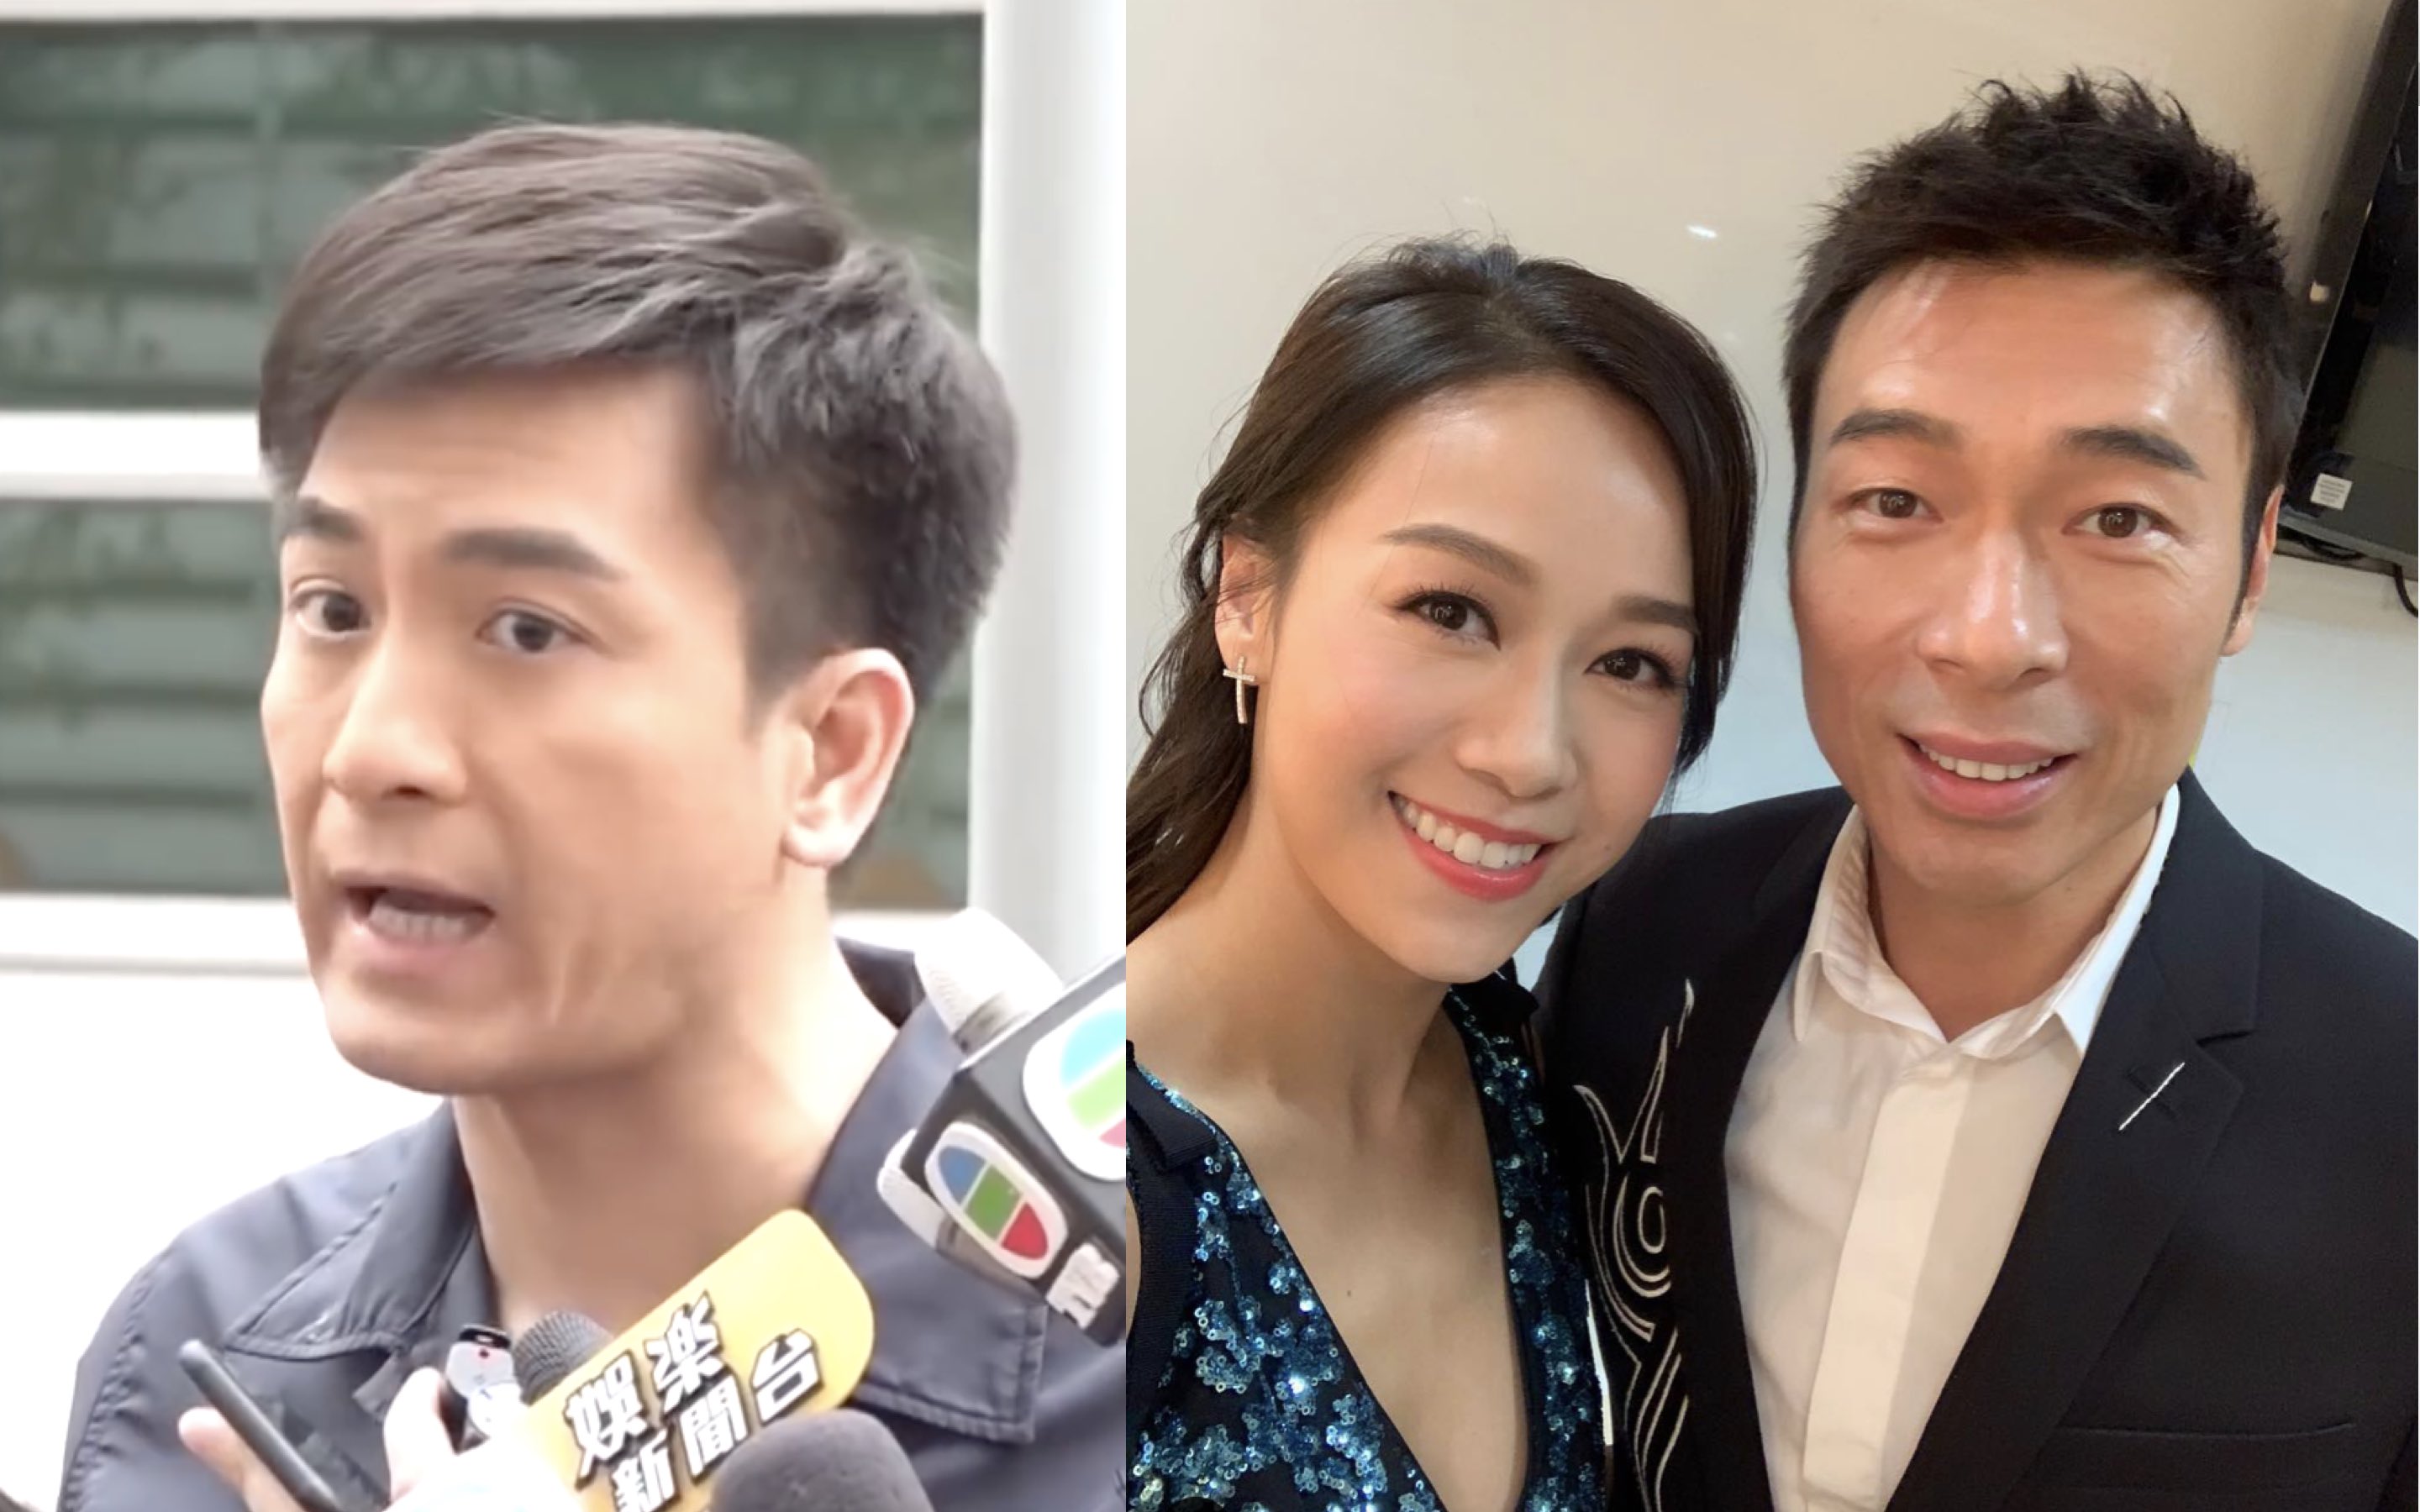 (Left) Kenneth Ma addressing reporters in Tseung Kwan O after his girlfriend Jacqueline Wong was caught on camera making out in the back of a car with married pop star Andy Hui. (Right) Wong and Hui at an event in October 2018. Screengrabs and photos via YouTube and Instagram.